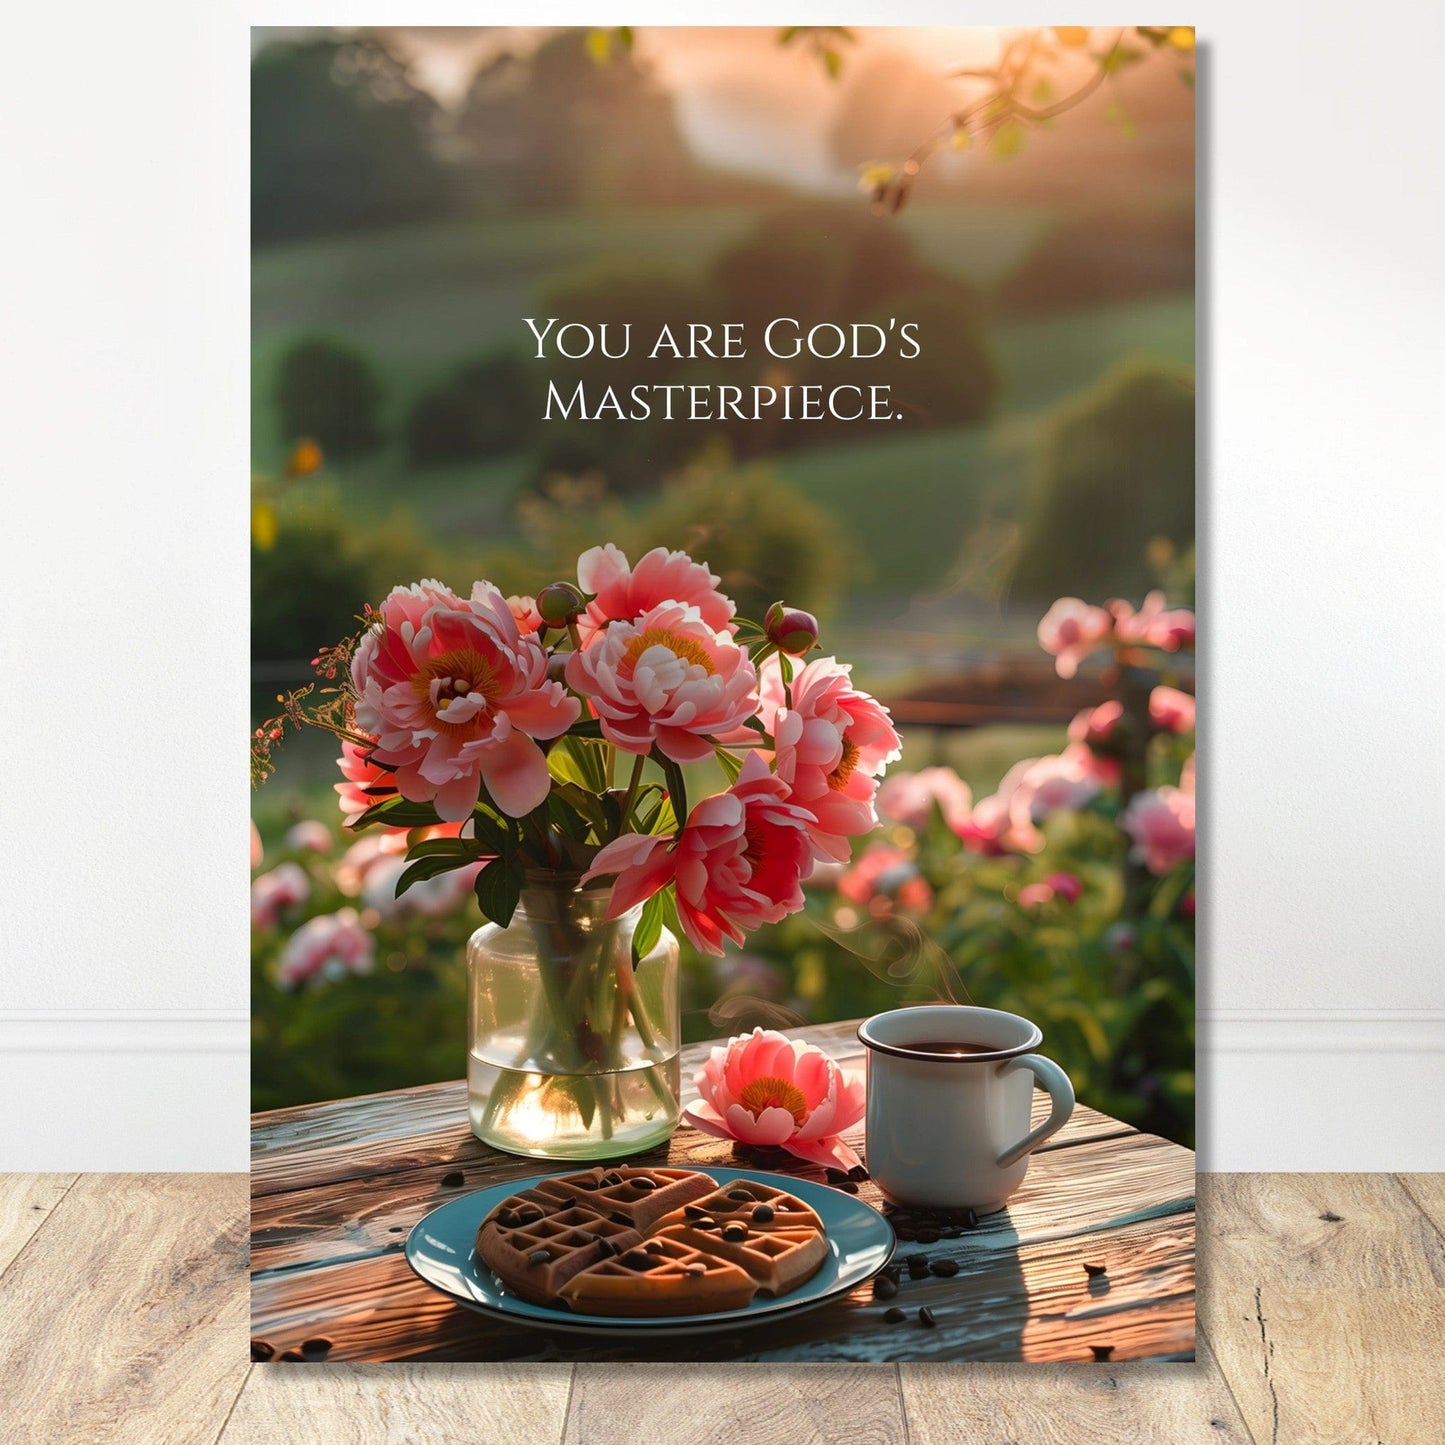 Coffee With My Father Print Material 21x29.7 cm / 8x12″ / Unframed / Unframed - Poster Only You Are God's Masterpiece - Artwork